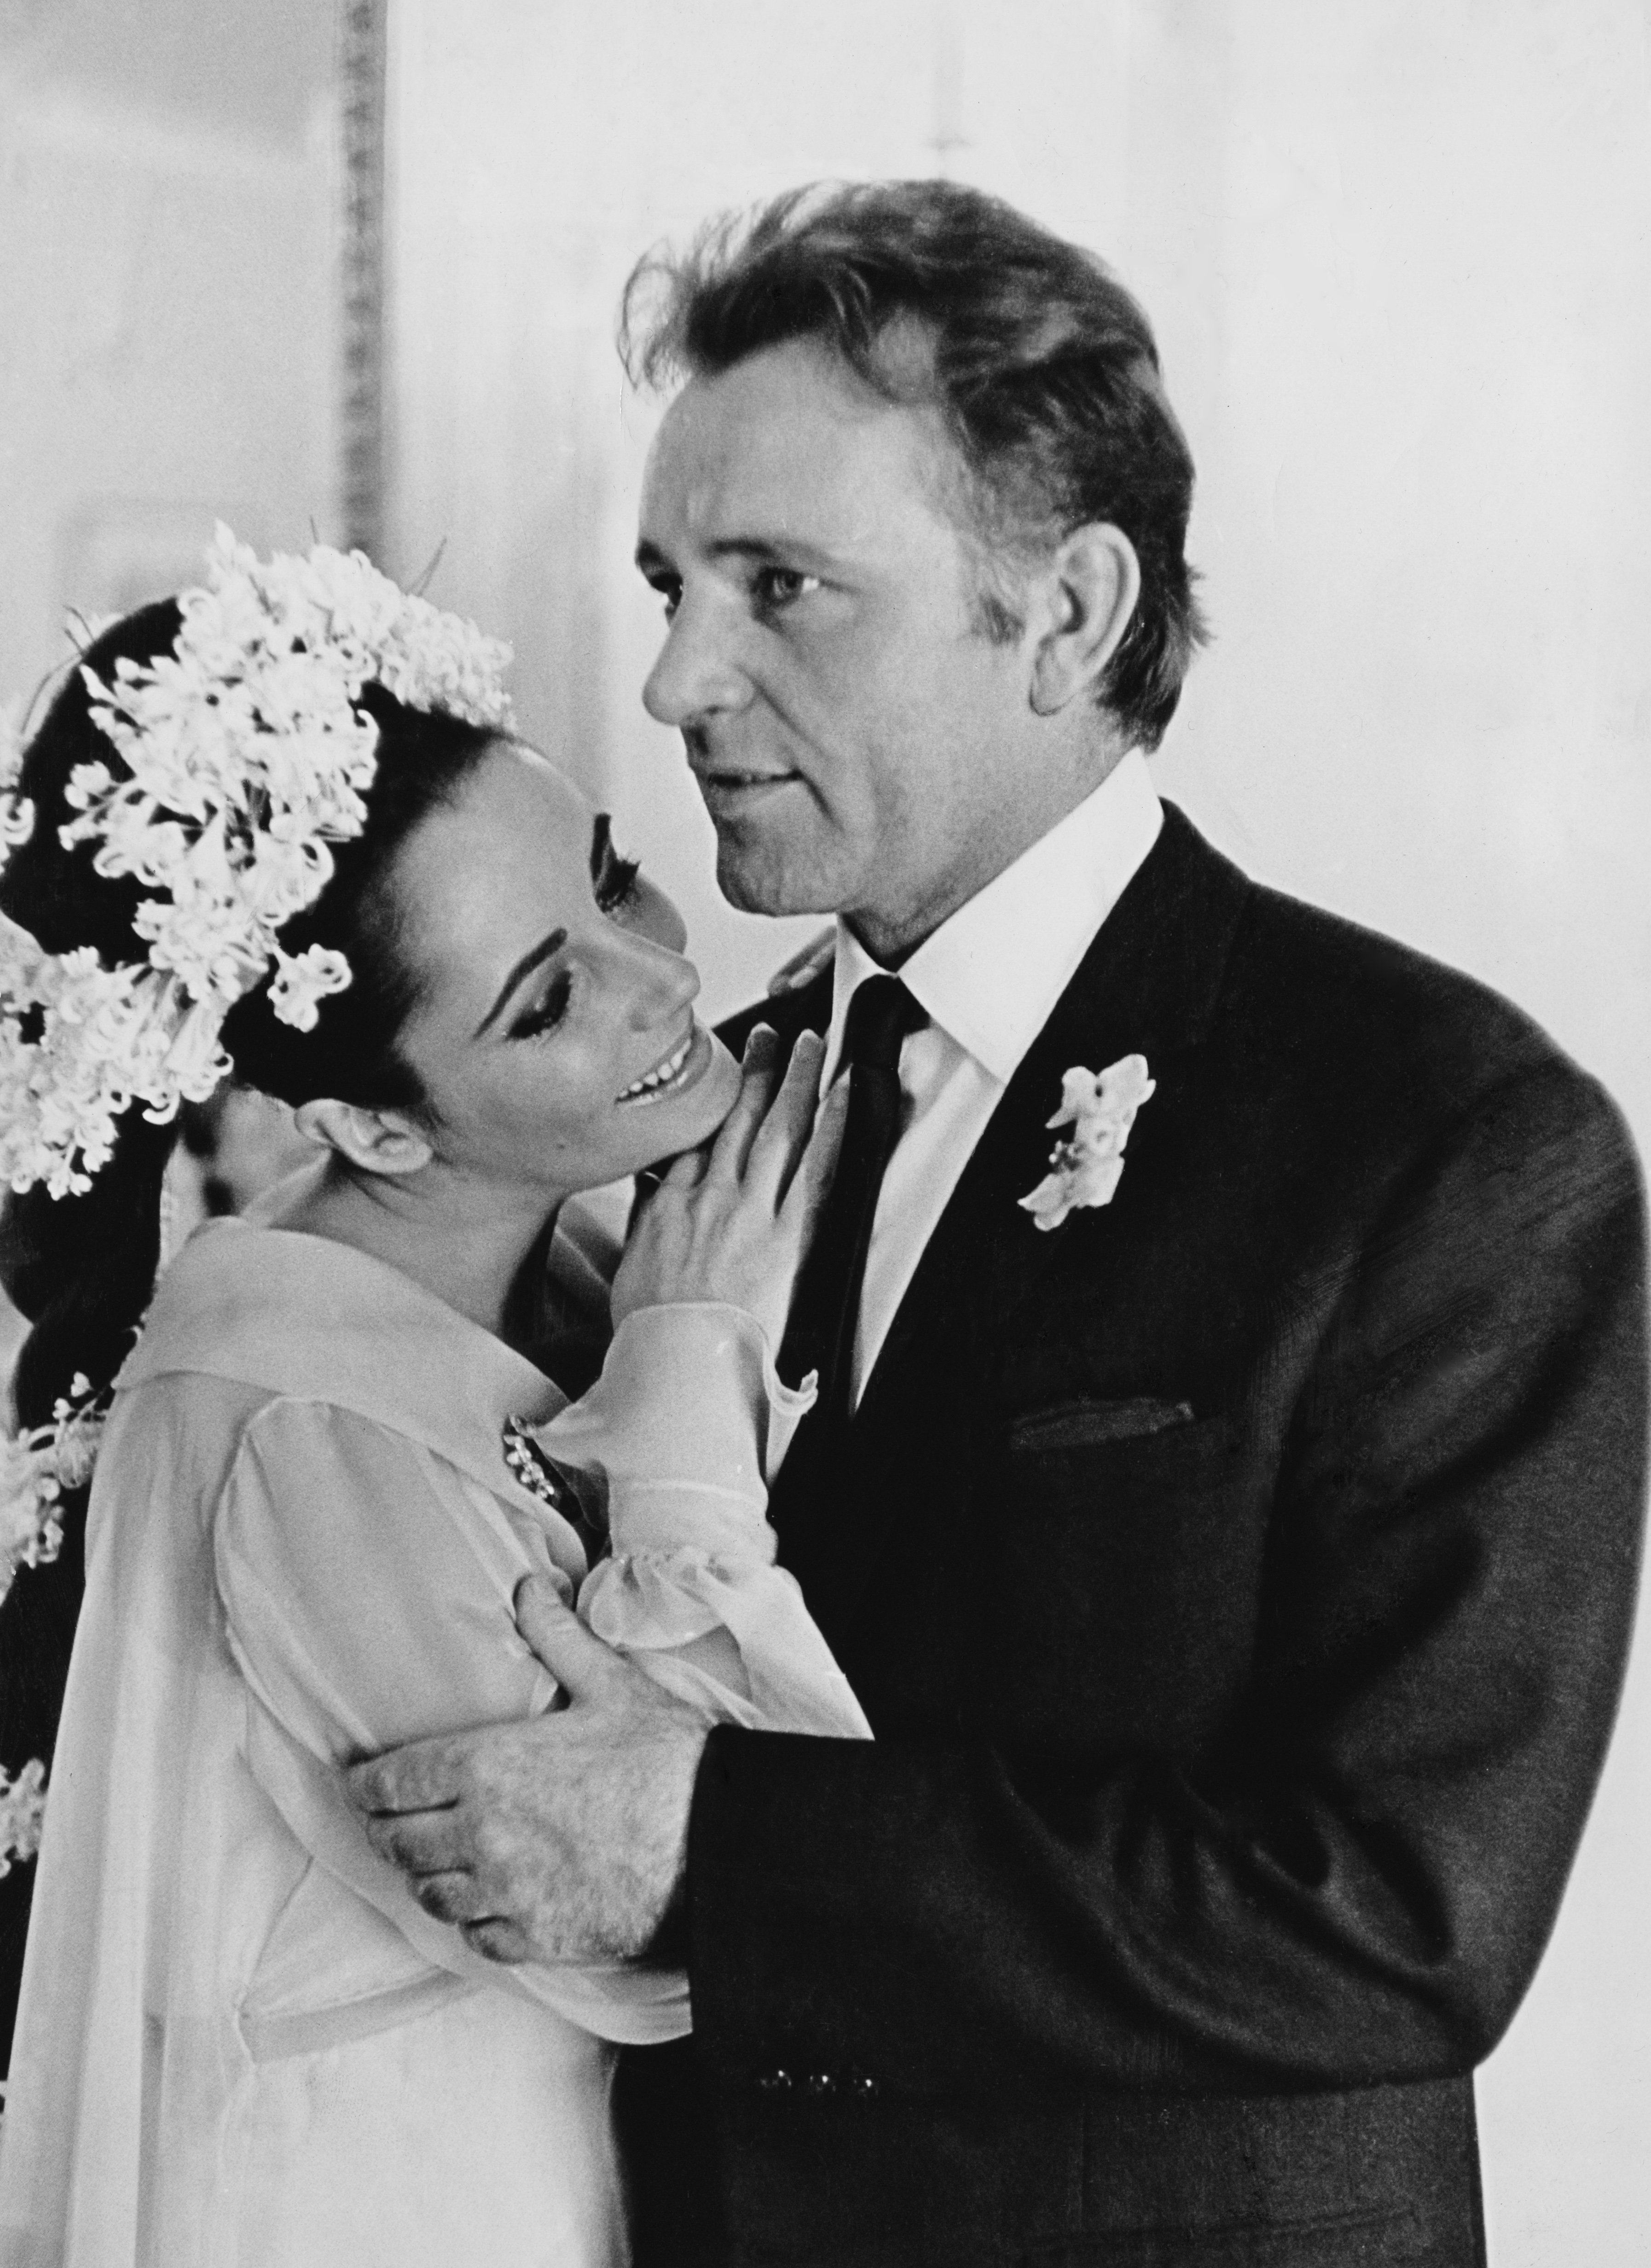 British natives Elizabeth Taylor and actor Richard Burton at their first wedding in 1964 in Montreal, Canada. / Source: Getty Images